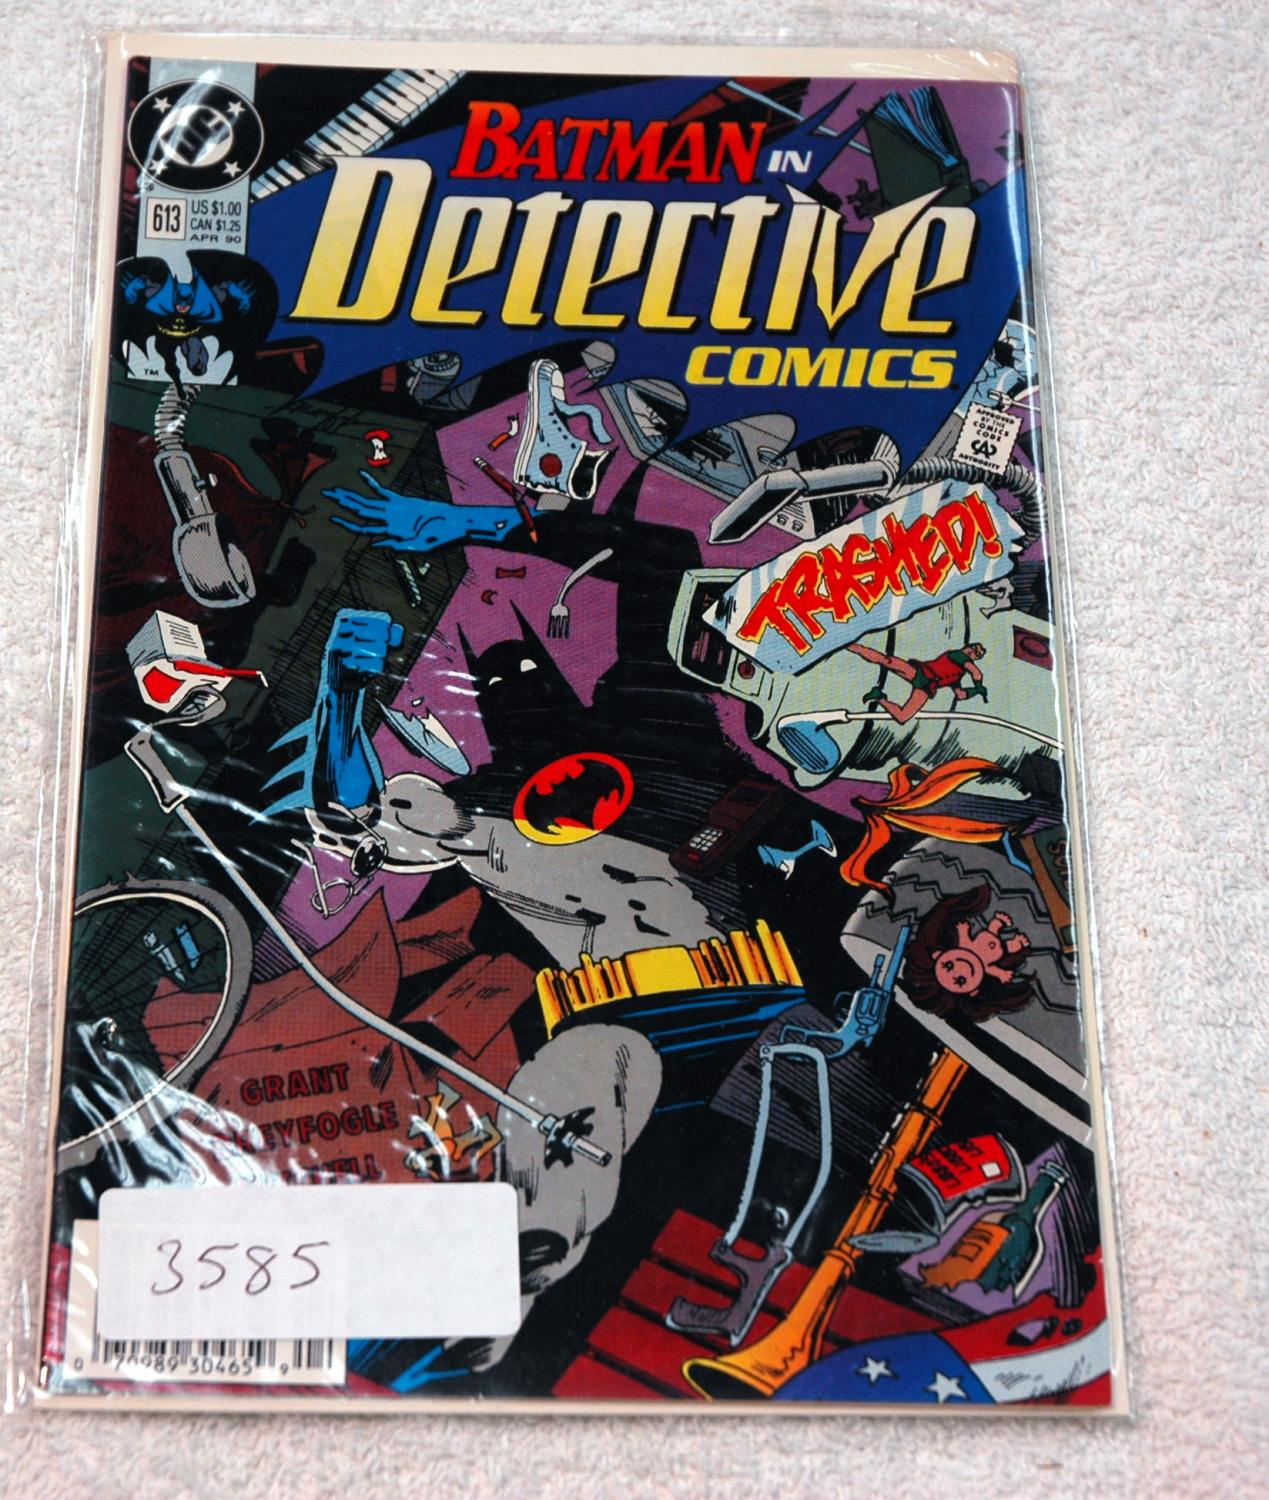 DETECTIVE COMICS (Batman in) Apr. #613 by Illustrated by Norm Breyfogle: As  New Soft cover Comic Book | Preferred Books